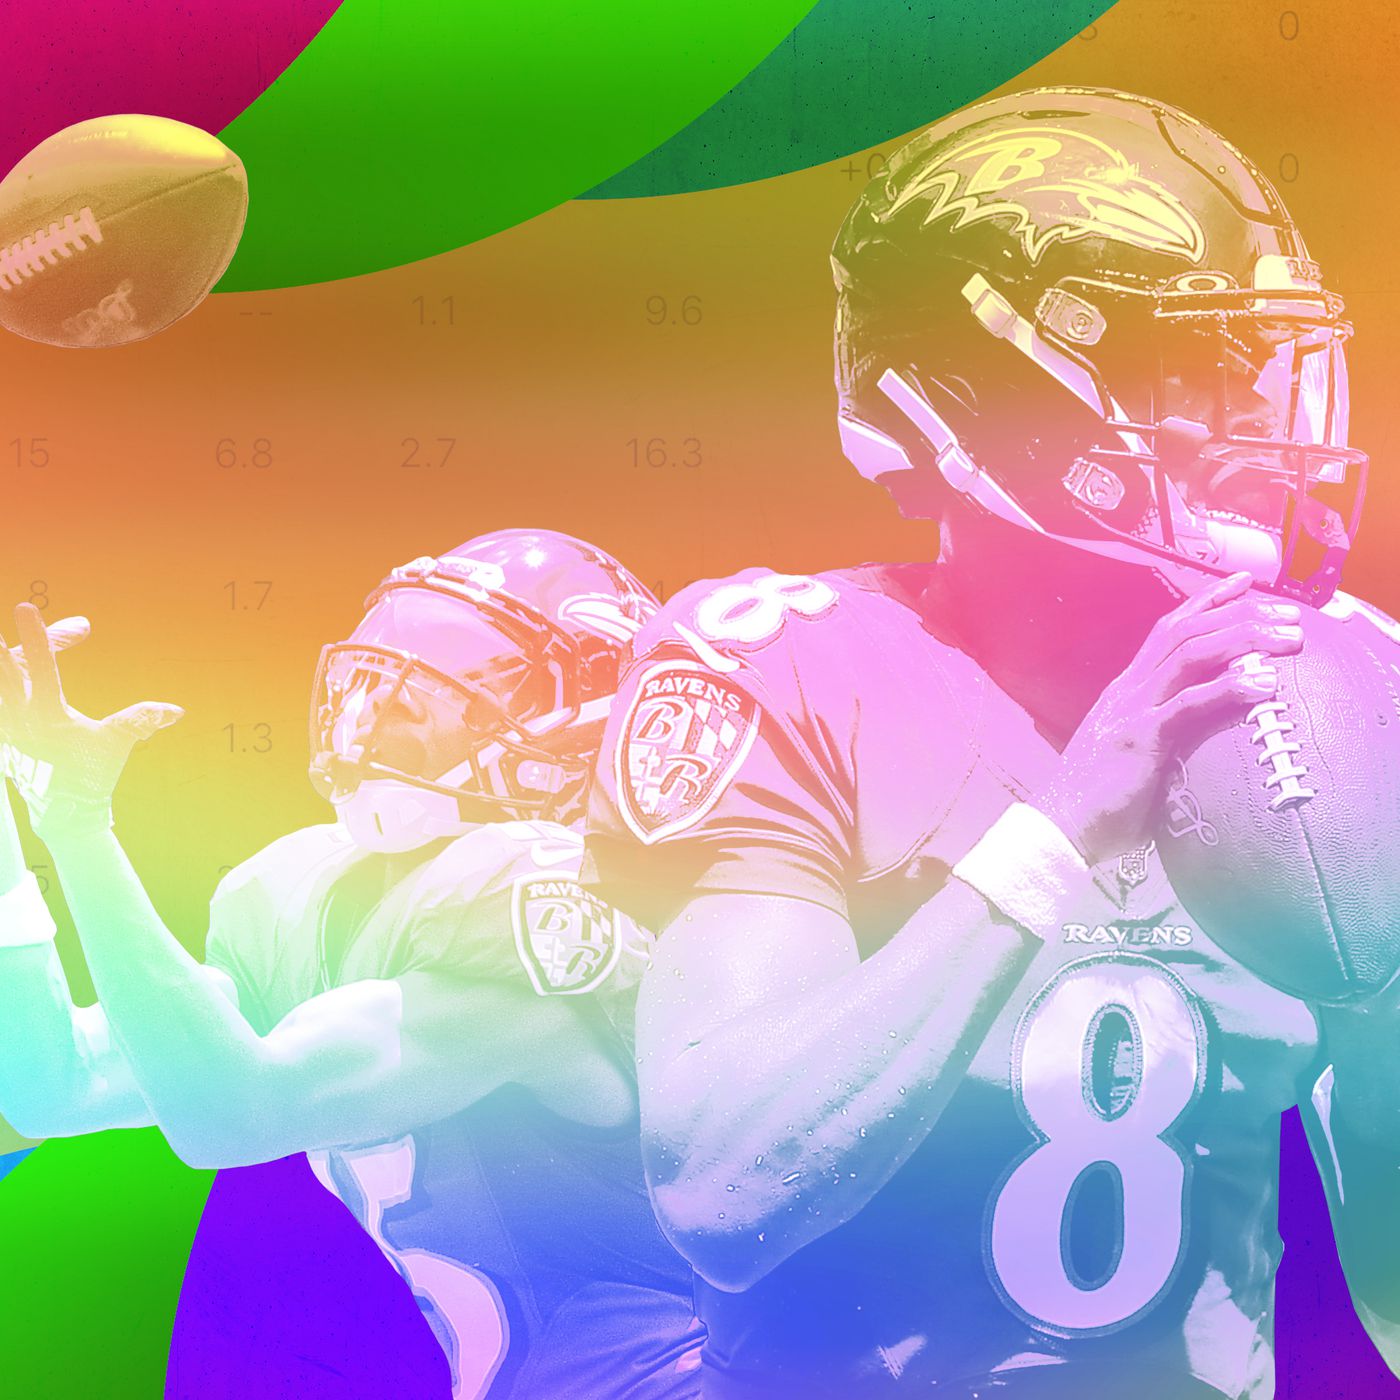 Lamar Jackson's Ravens Are Poised to Define Fantasy Football in 2019